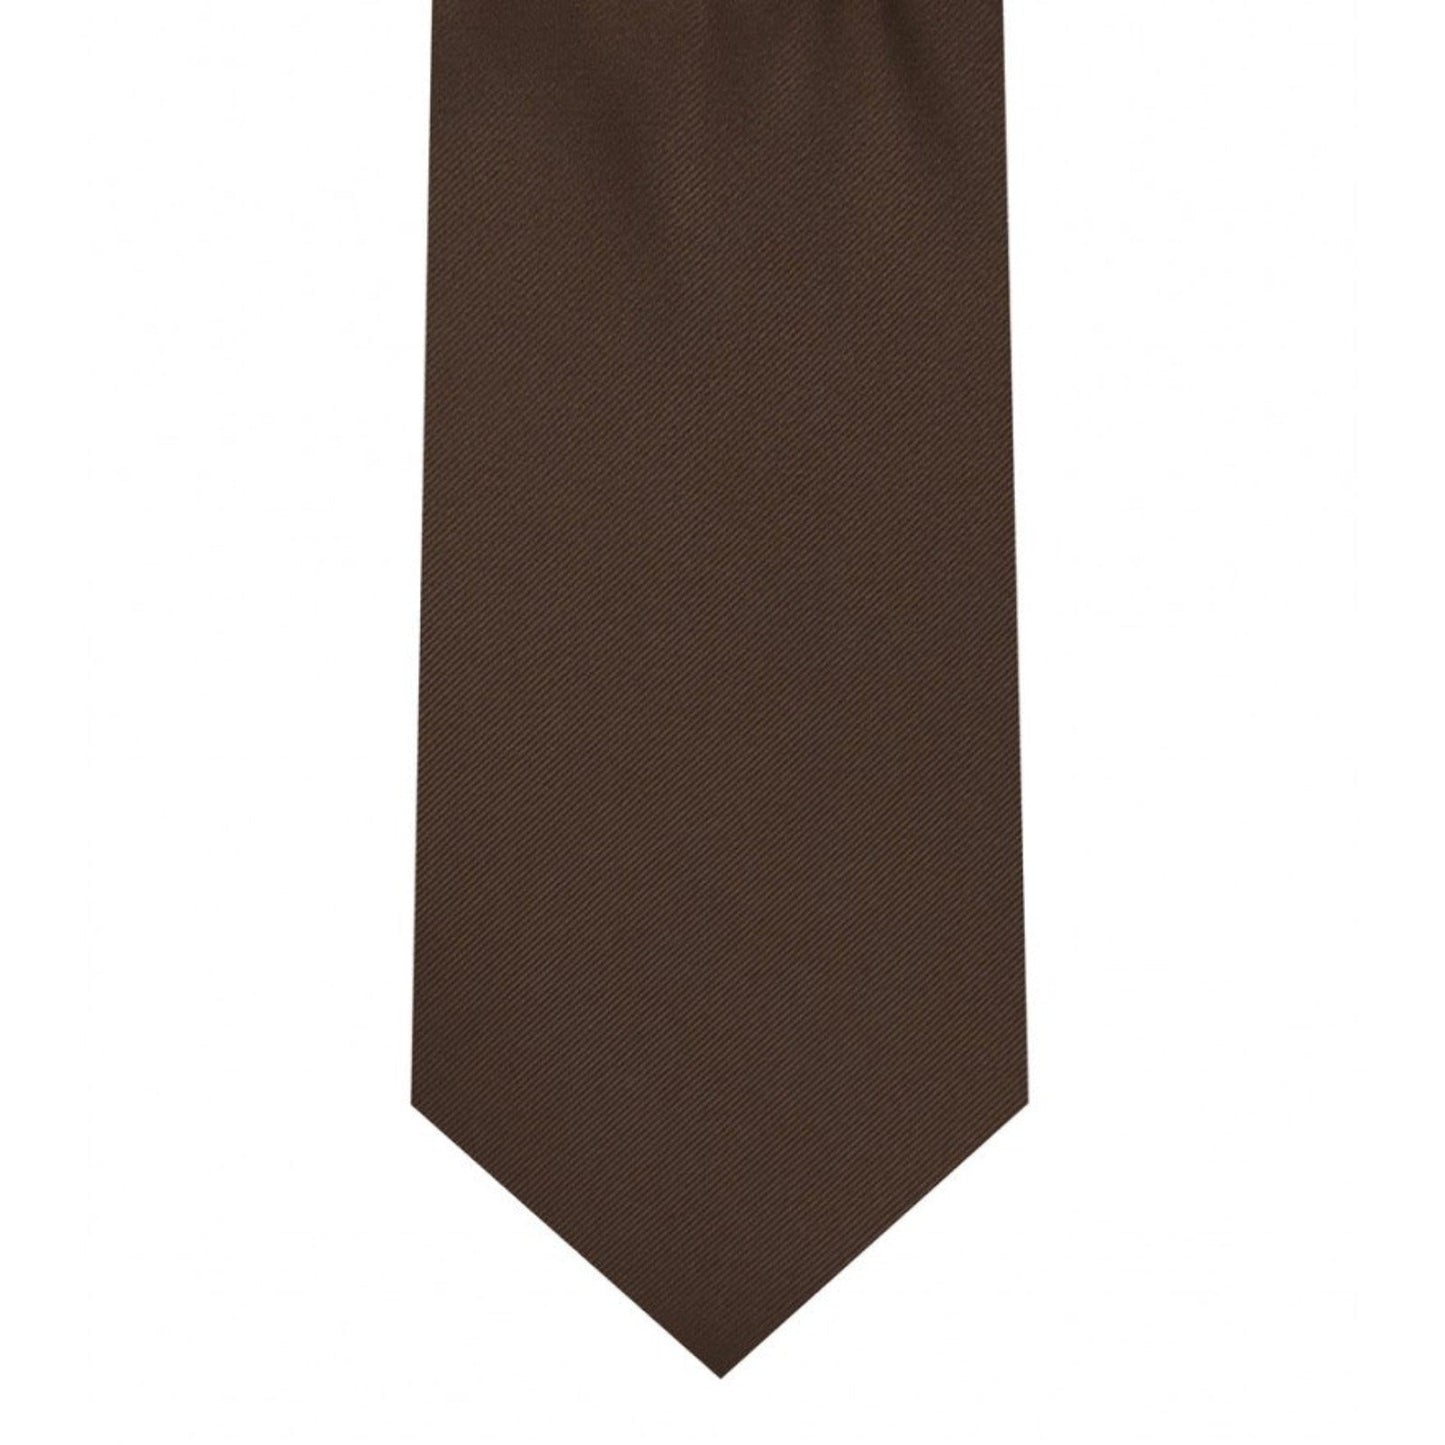 Classic Chocolate Brown Tie Skinny width 2.75 inches With Matching Pocket Square | KCT Menswear 